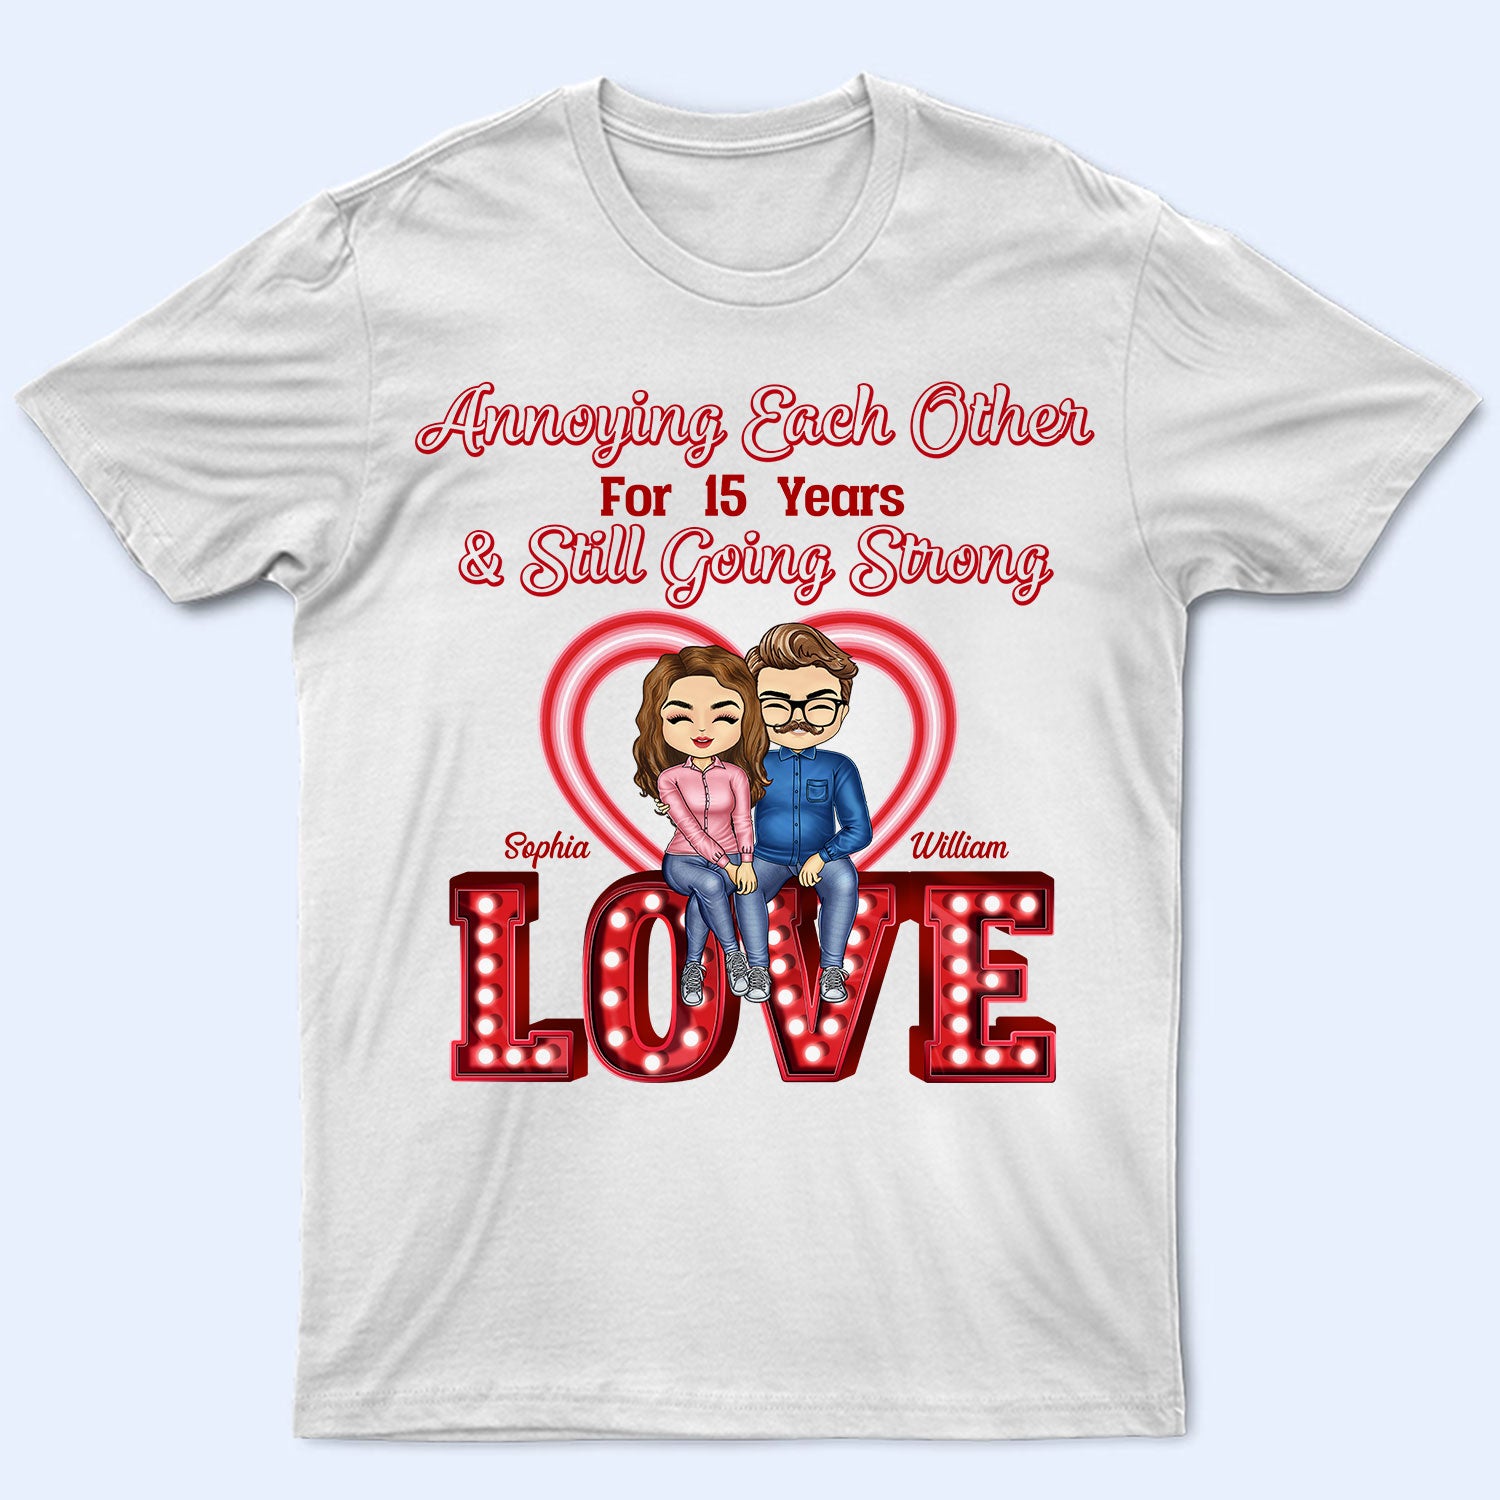 Annoying Each Other For Years And Still Going Strong - Anniversary, Birthday Gift For Spouse, Lover, Husband, Wife, Boyfriend, Girlfriend, Couple - Personalized Custom T Shirt